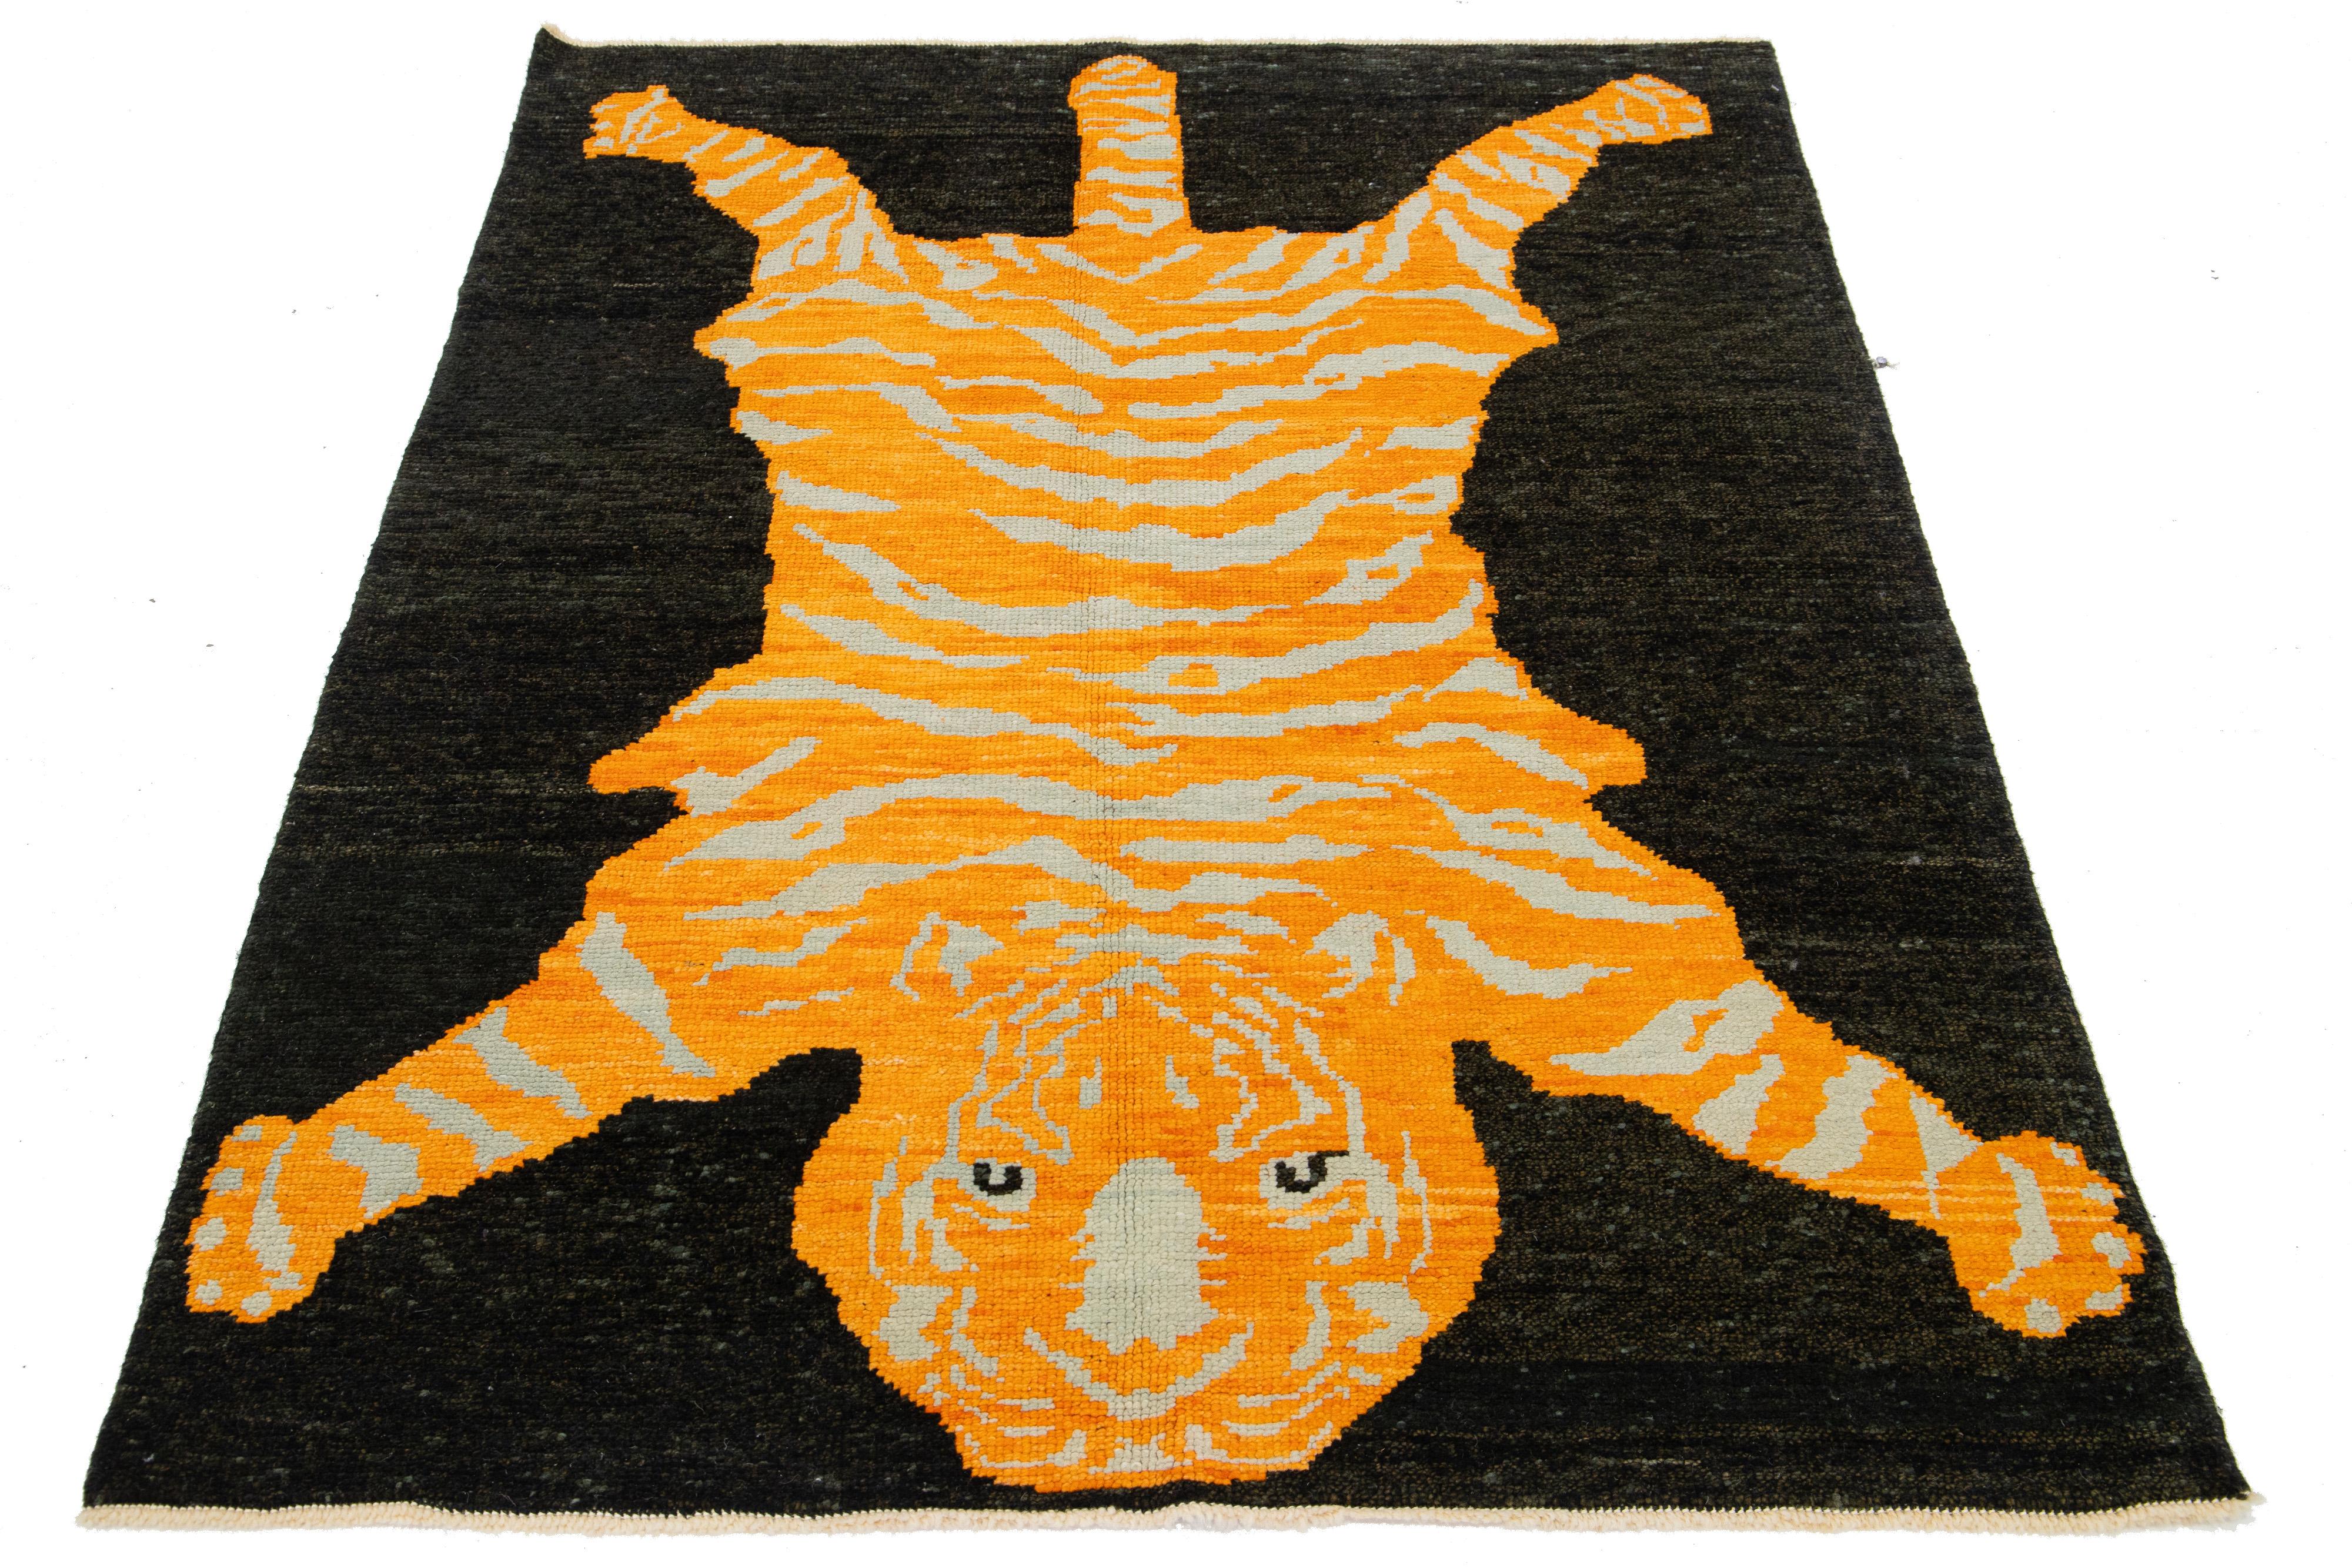 This is a beautiful handmade Turkish Art Deco wool rug with a black field and orange and beige accent colors in a gorgeous tiger pictorial design. 

This rug measures 4'10